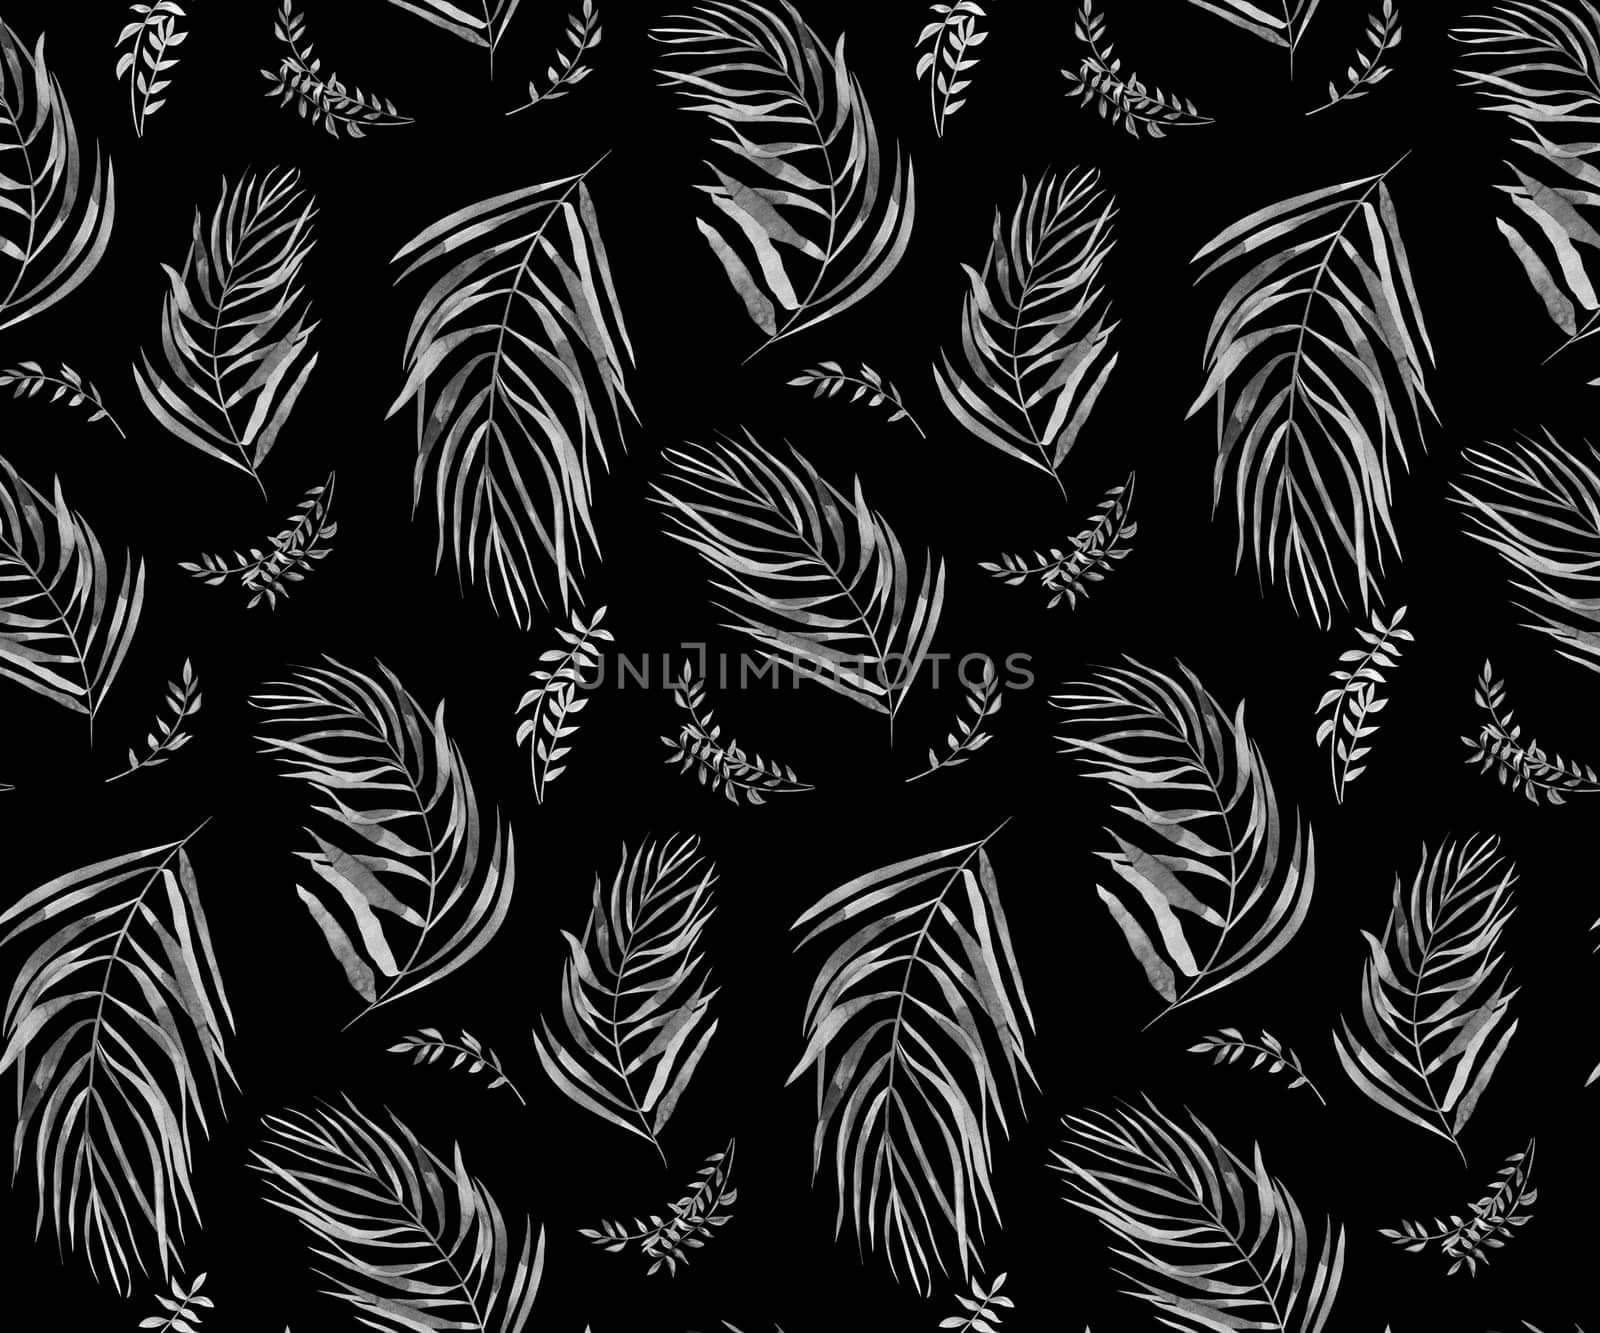 Monochrome watercolor seamless pattern with herbarium of flowers and tropical palm leaves